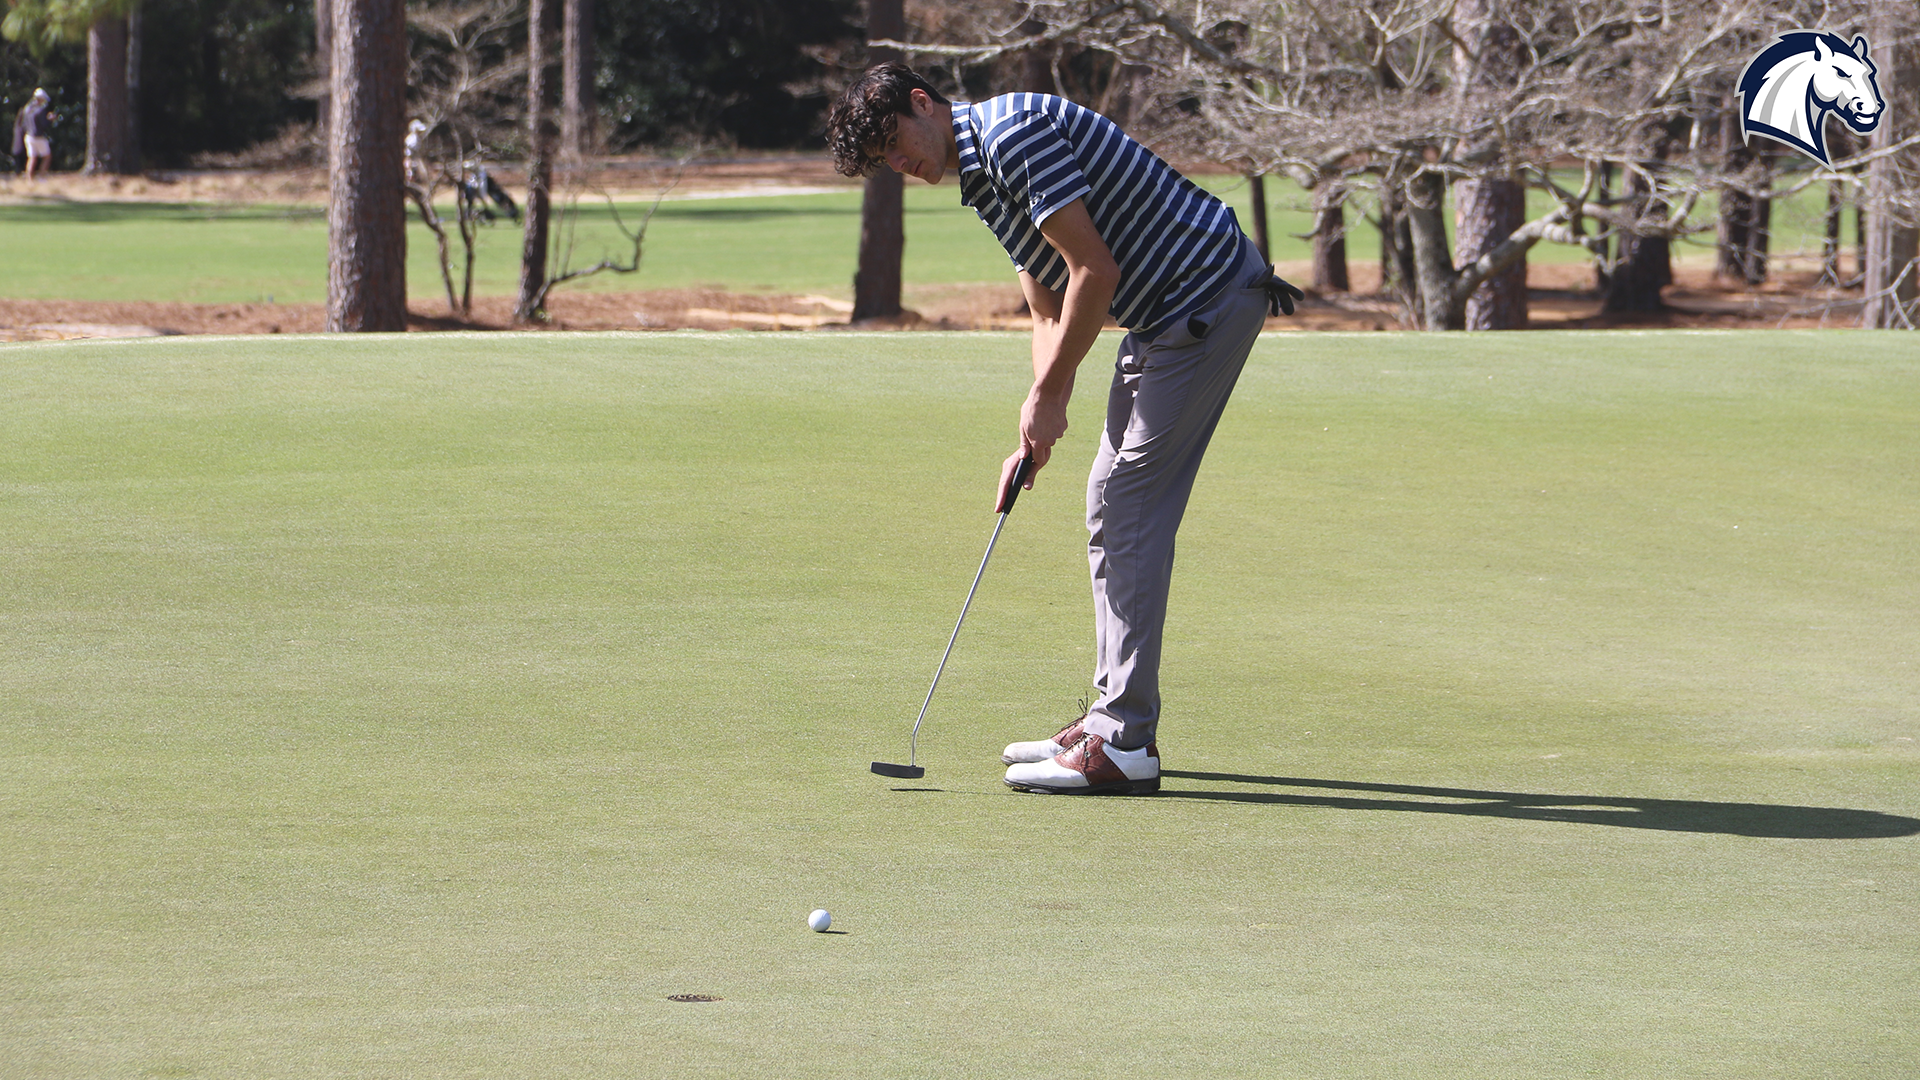 Chargers take 12th in hotly-contested SVSU Spring Invitational